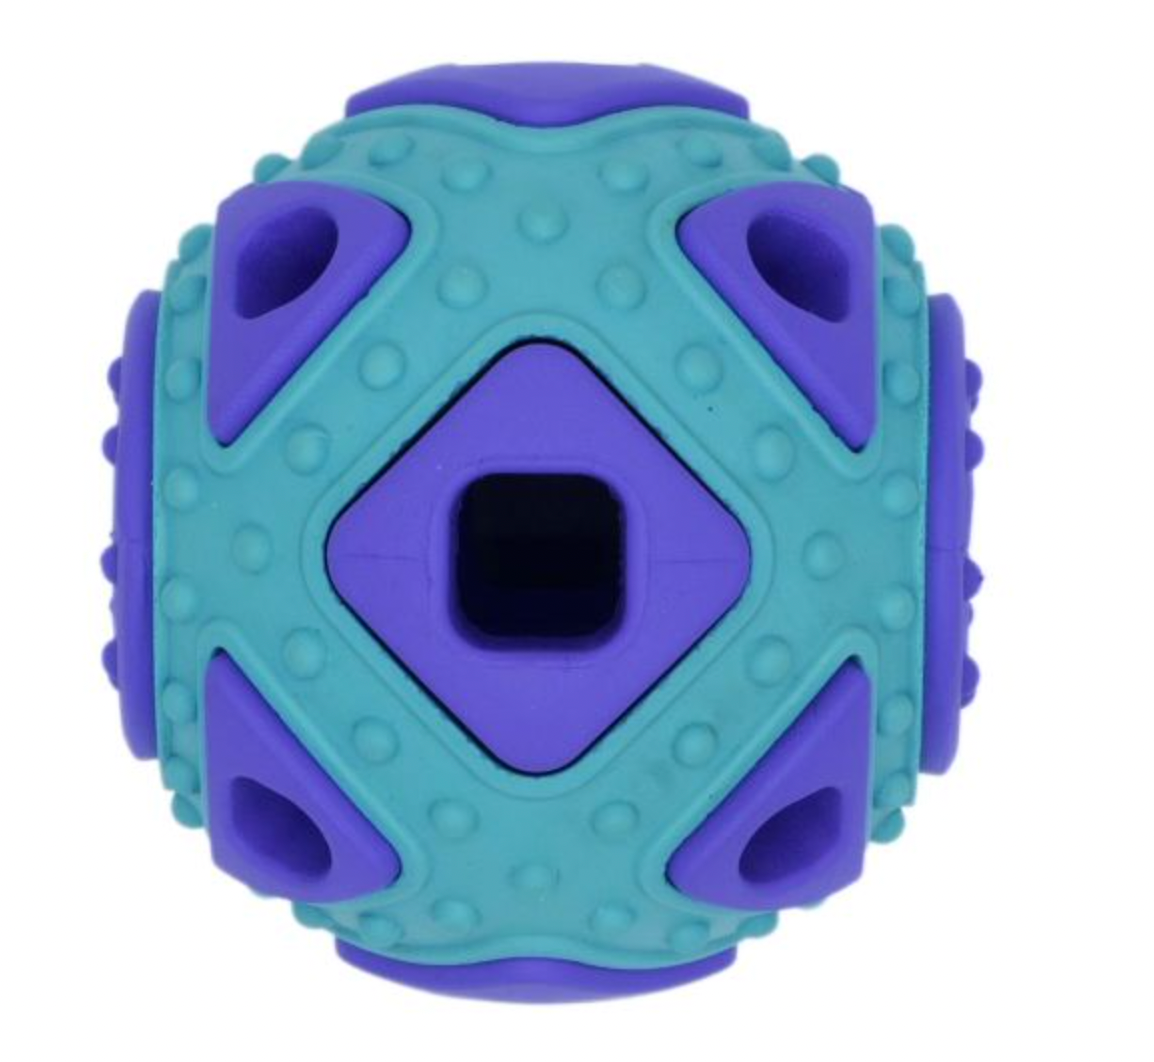 Bud'z Rubber Astro Ball - Squared Blue Dog Toy (2.5")